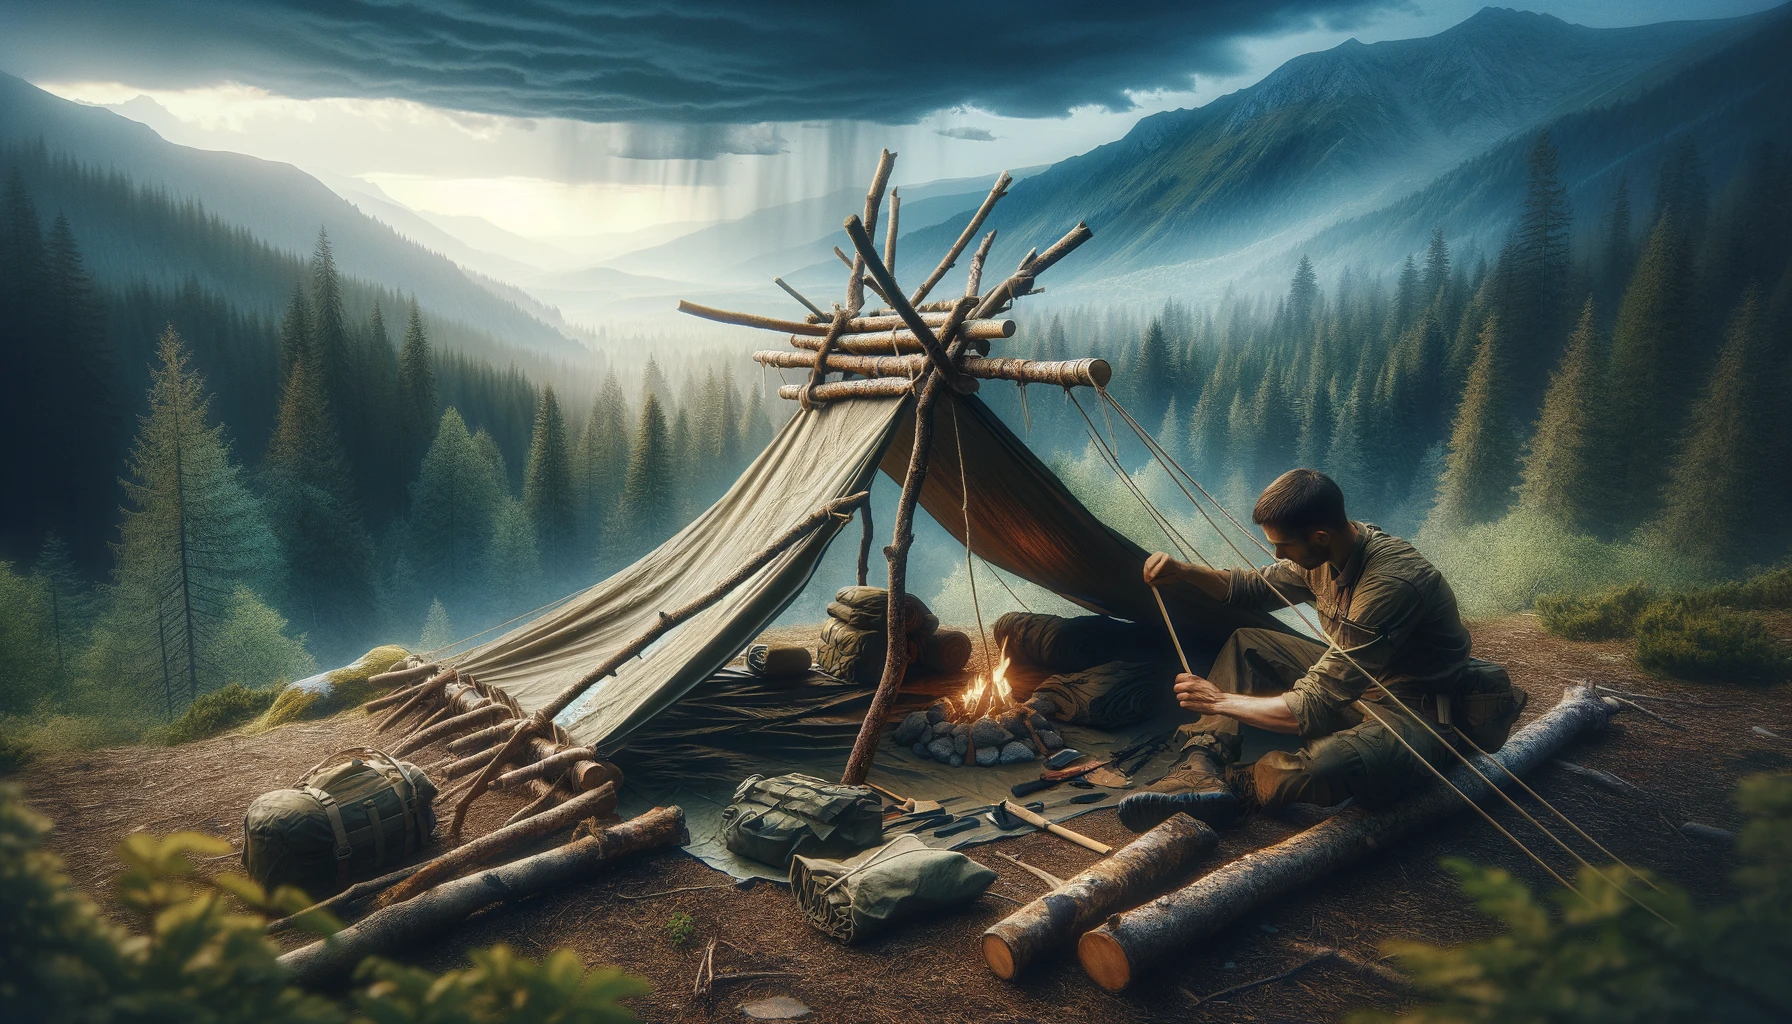 A highly detailed, realistic depiction of constructing a tarp shelter in a wilderness setting, showcasing the process of anchoring a durable tarp with natural materials and securing it with ropes. The backdrop indicates impending weather changes, highlighting the shelter's utility in providing immediate protection, designed to inspire confidence in survival gear preparation.